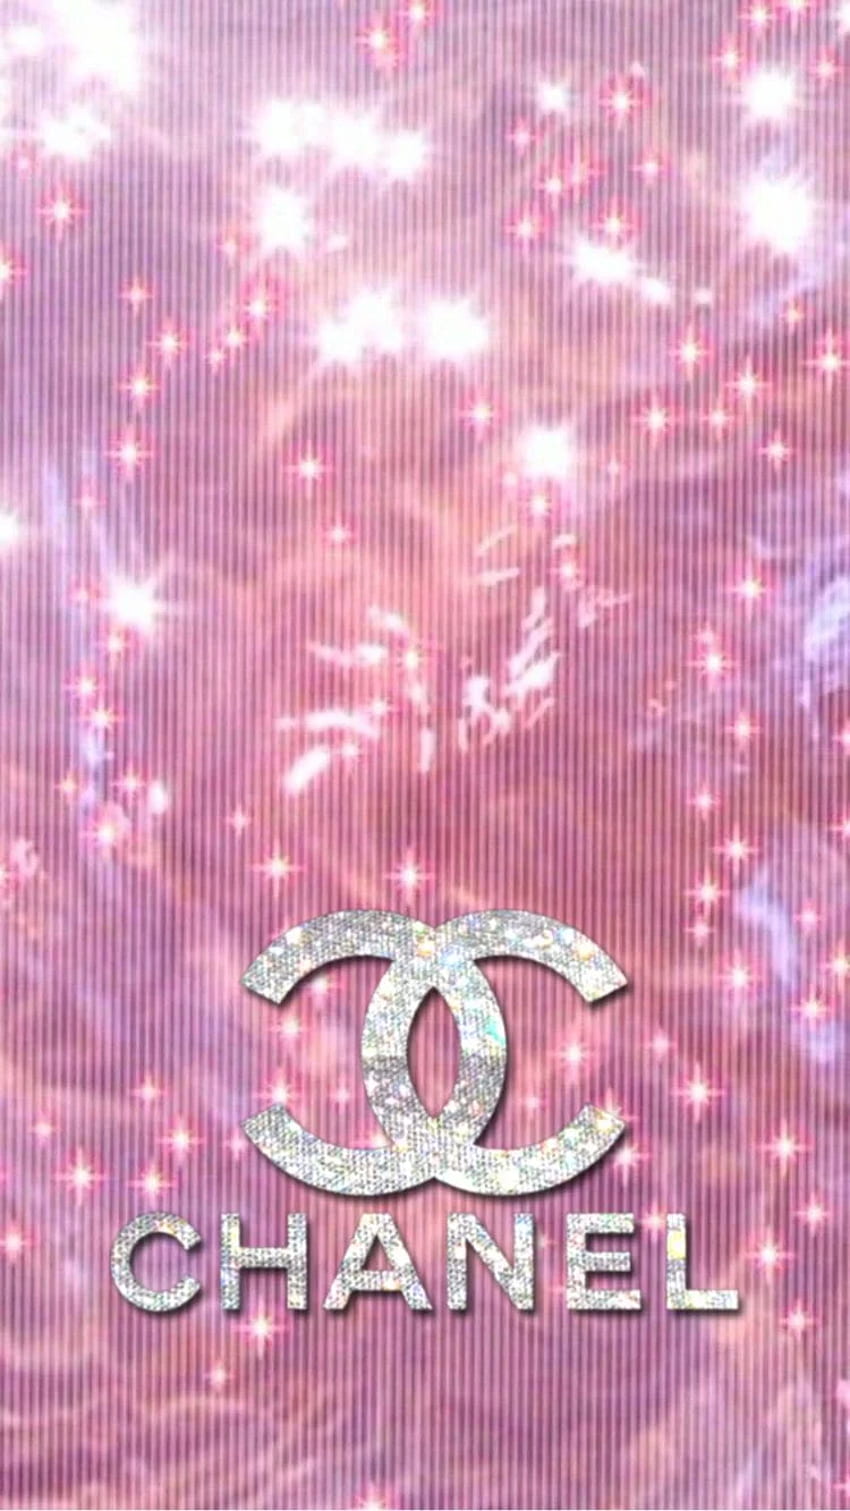 Chanel . Sparkle , Art collage wall, Pink wall collage, Chanel Girly HD phone wallpaper